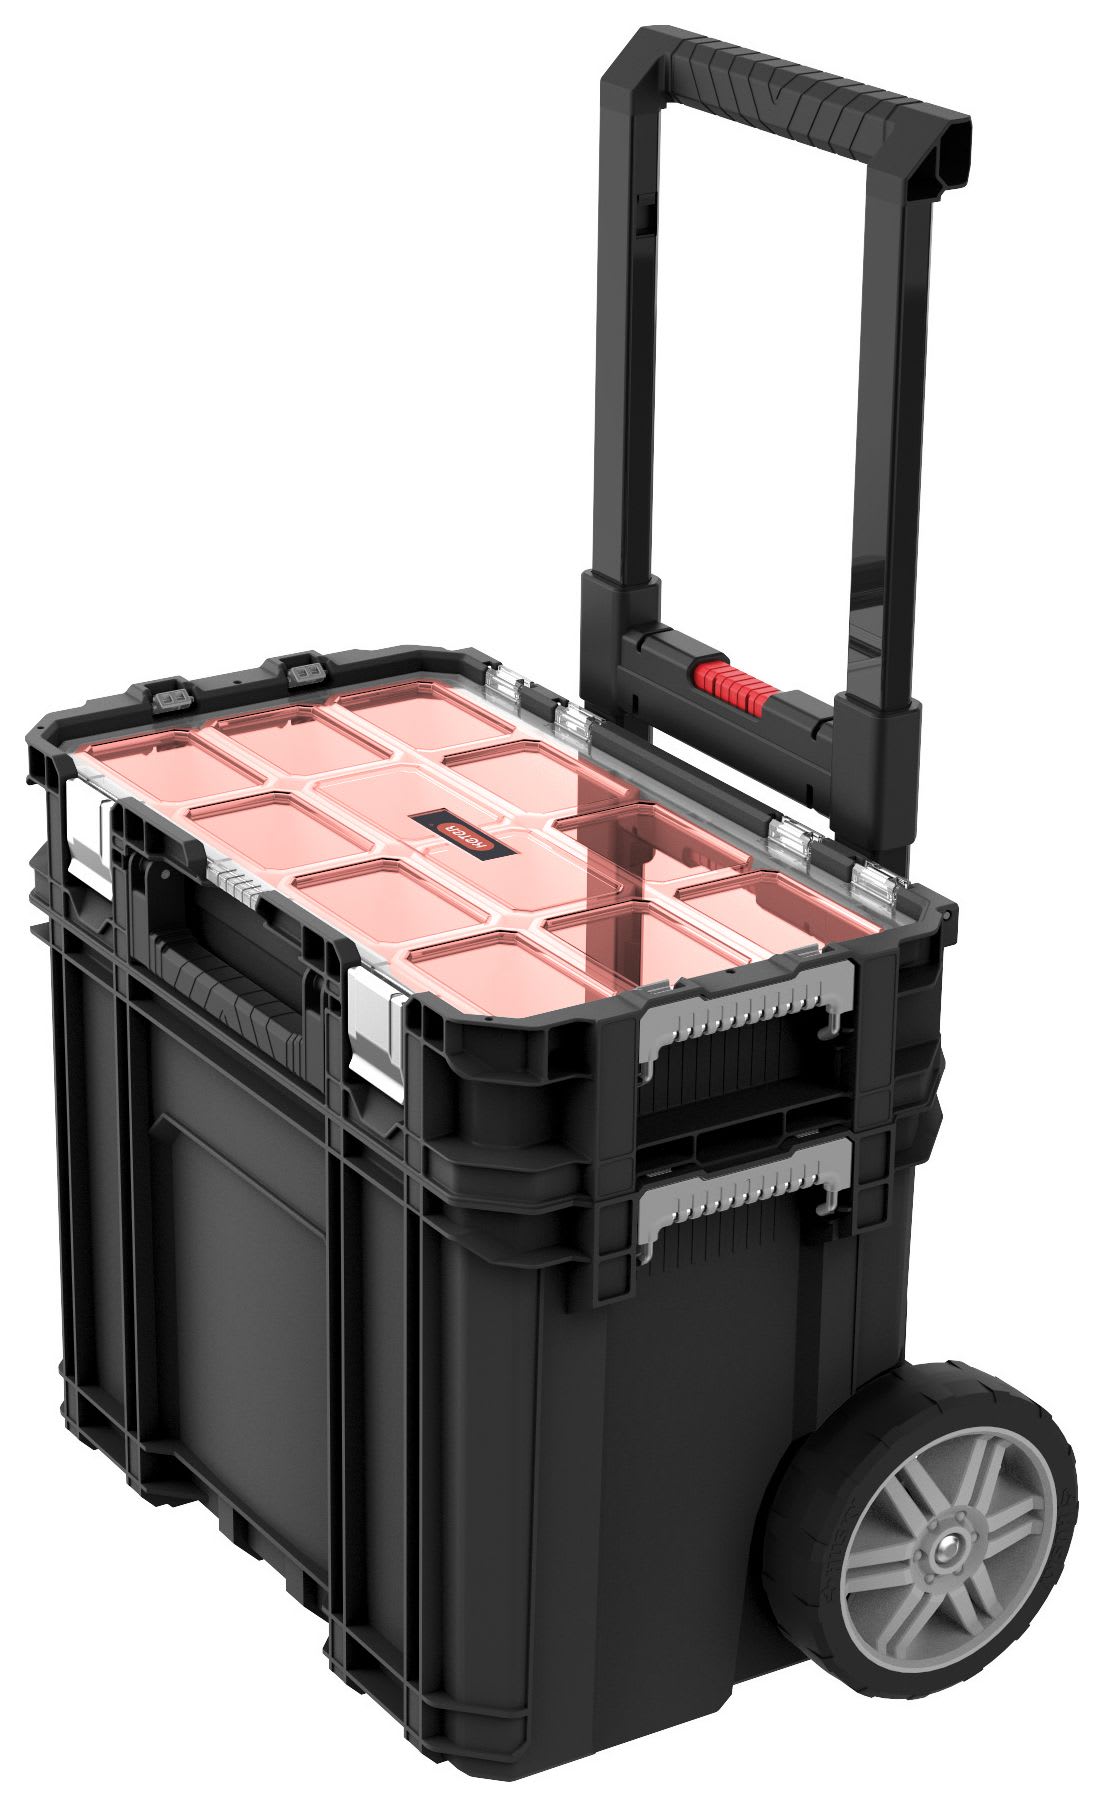 Keter Connect Storage Mobile Cart with Organiser